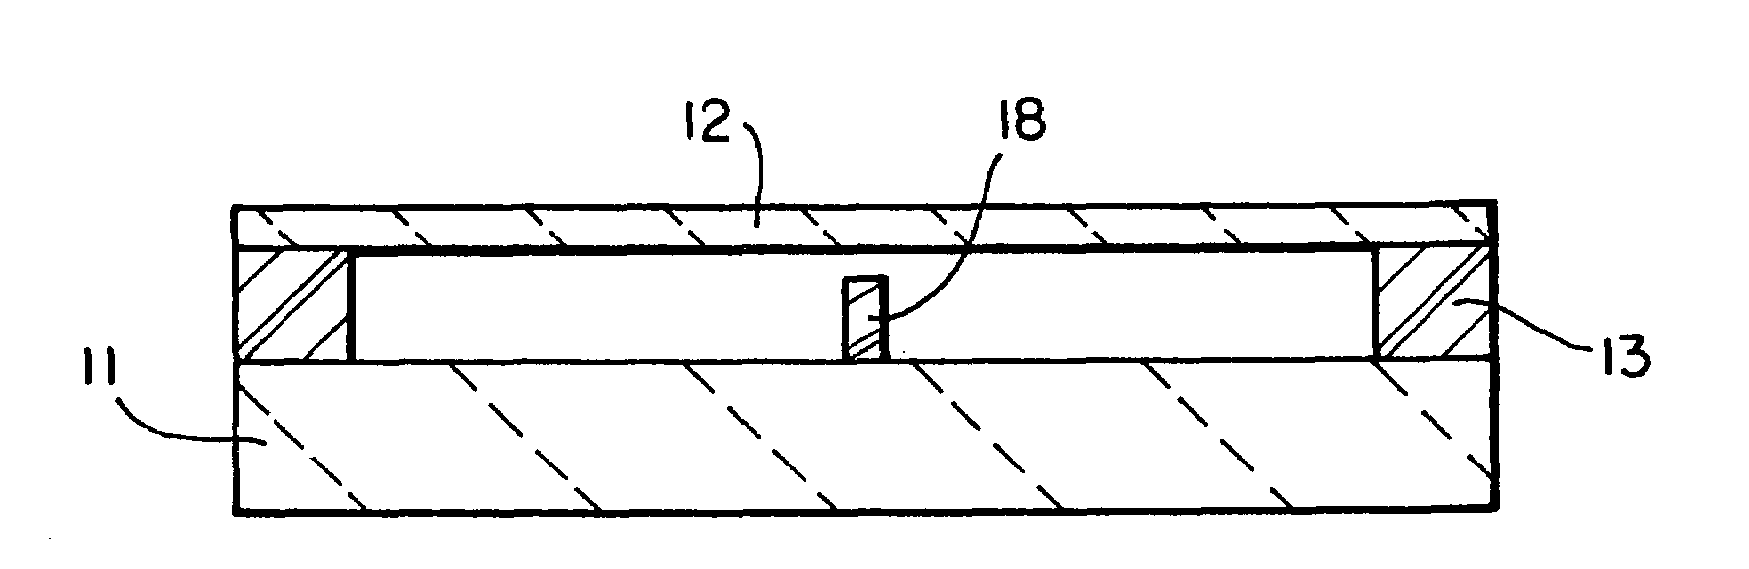 Capacitive ultrasonic transducers with isolation posts